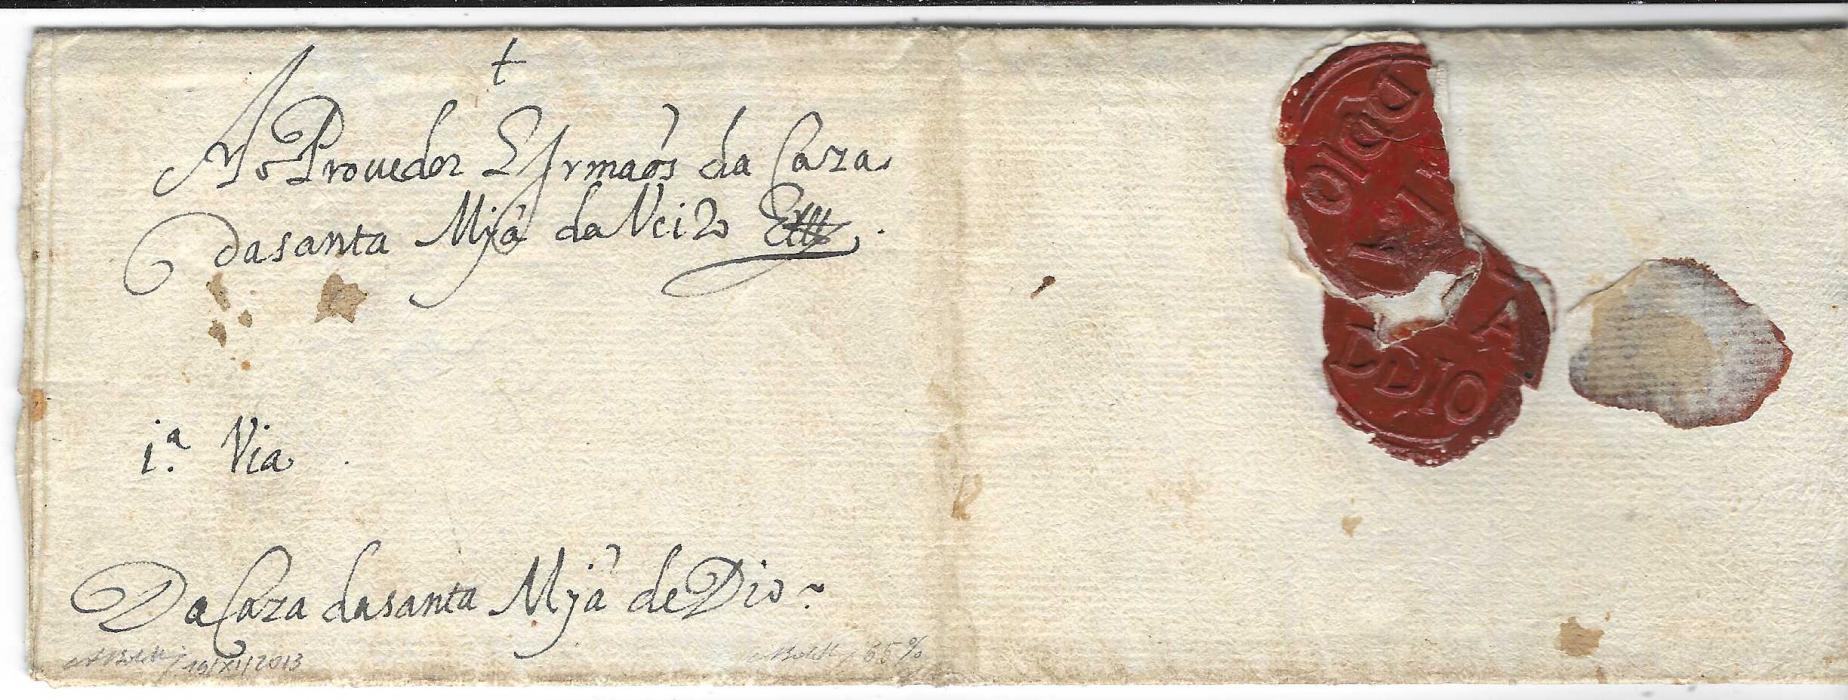 India (Portuguese Mail) 1628 (20th October) entire from the Mission of Diu, on the north-west coast to the Mission headquarters at Avaeiro, Portugal concerning the granting of an Inheritance, with two red wax seals of ‘MIA DDIO’ (Misericrdia Da Diu). Mail could take a year to arrive, normally travelling in December to take advantage of winter monsoons to arrive in Europe in June of the following year, at the top of letter the recipients note from 1629, the second page shows signatures of members of the Brotherhood of Diu. Extensive Bolaffi certificate. 